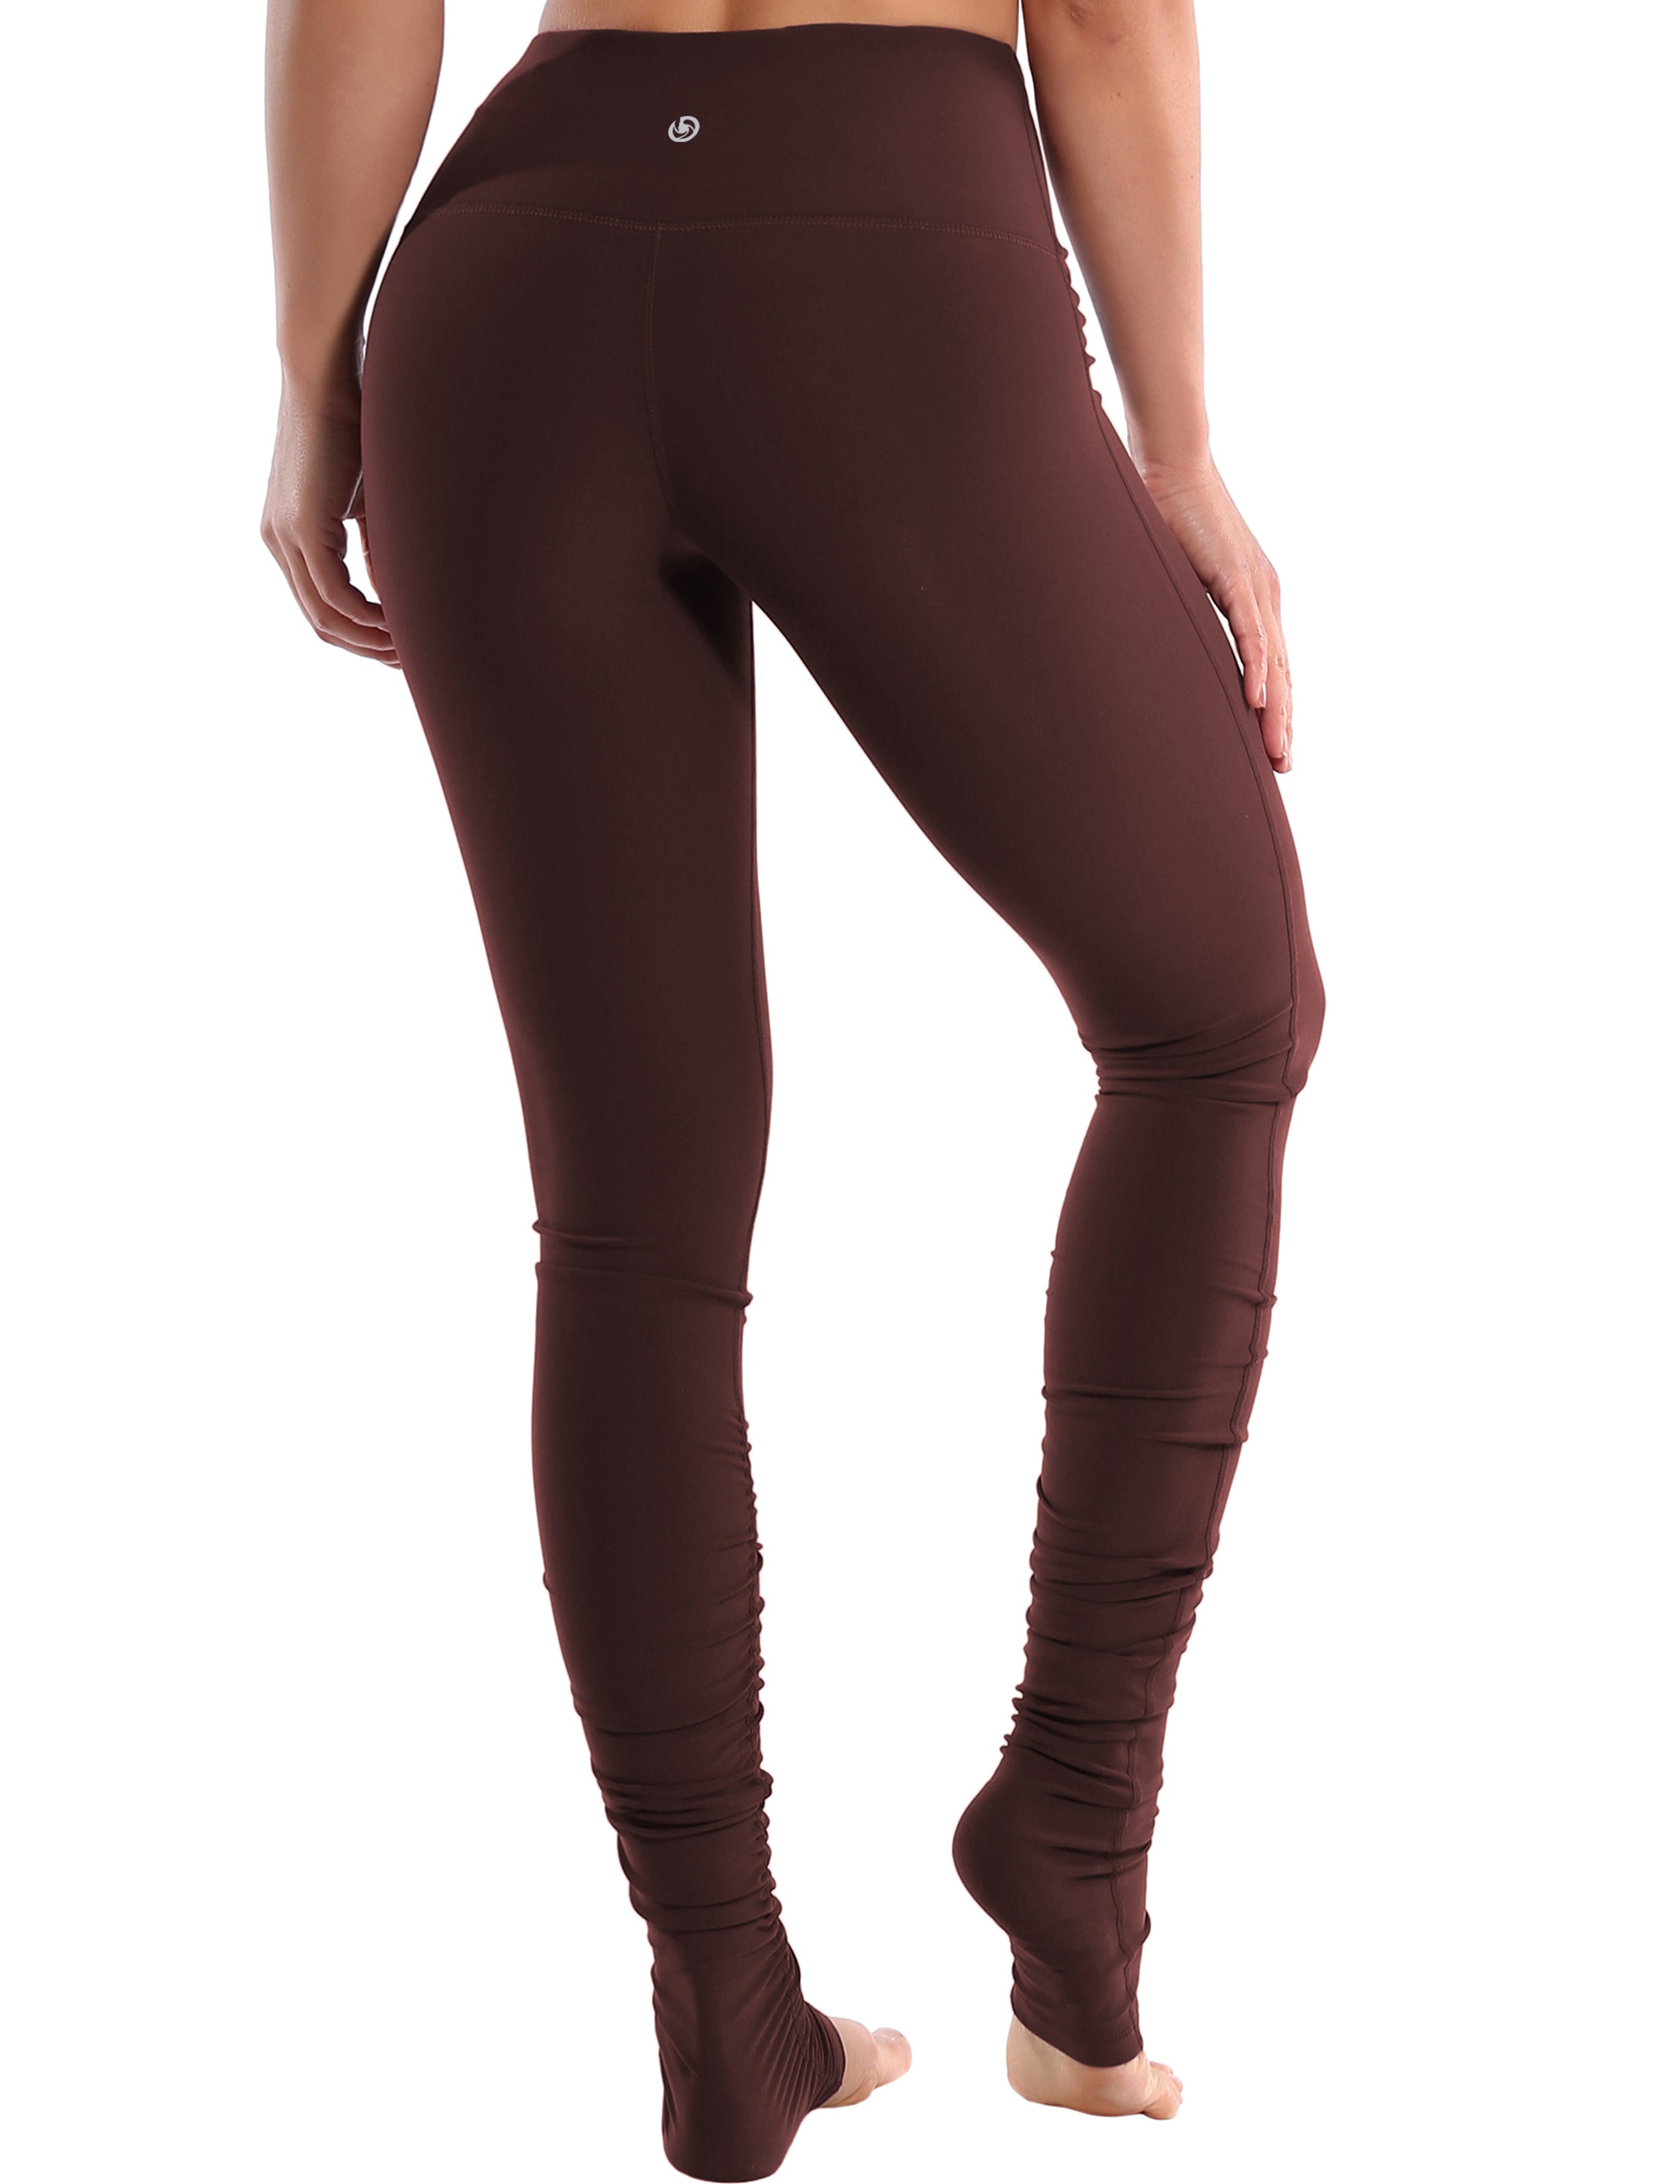 Over the Heel Yoga Pants mahoganymaroon Over the Heel Design 87%Nylon/13%Spandex Fabric doesn't attract lint easily 4-way stretch No see-through Moisture-wicking Tummy control